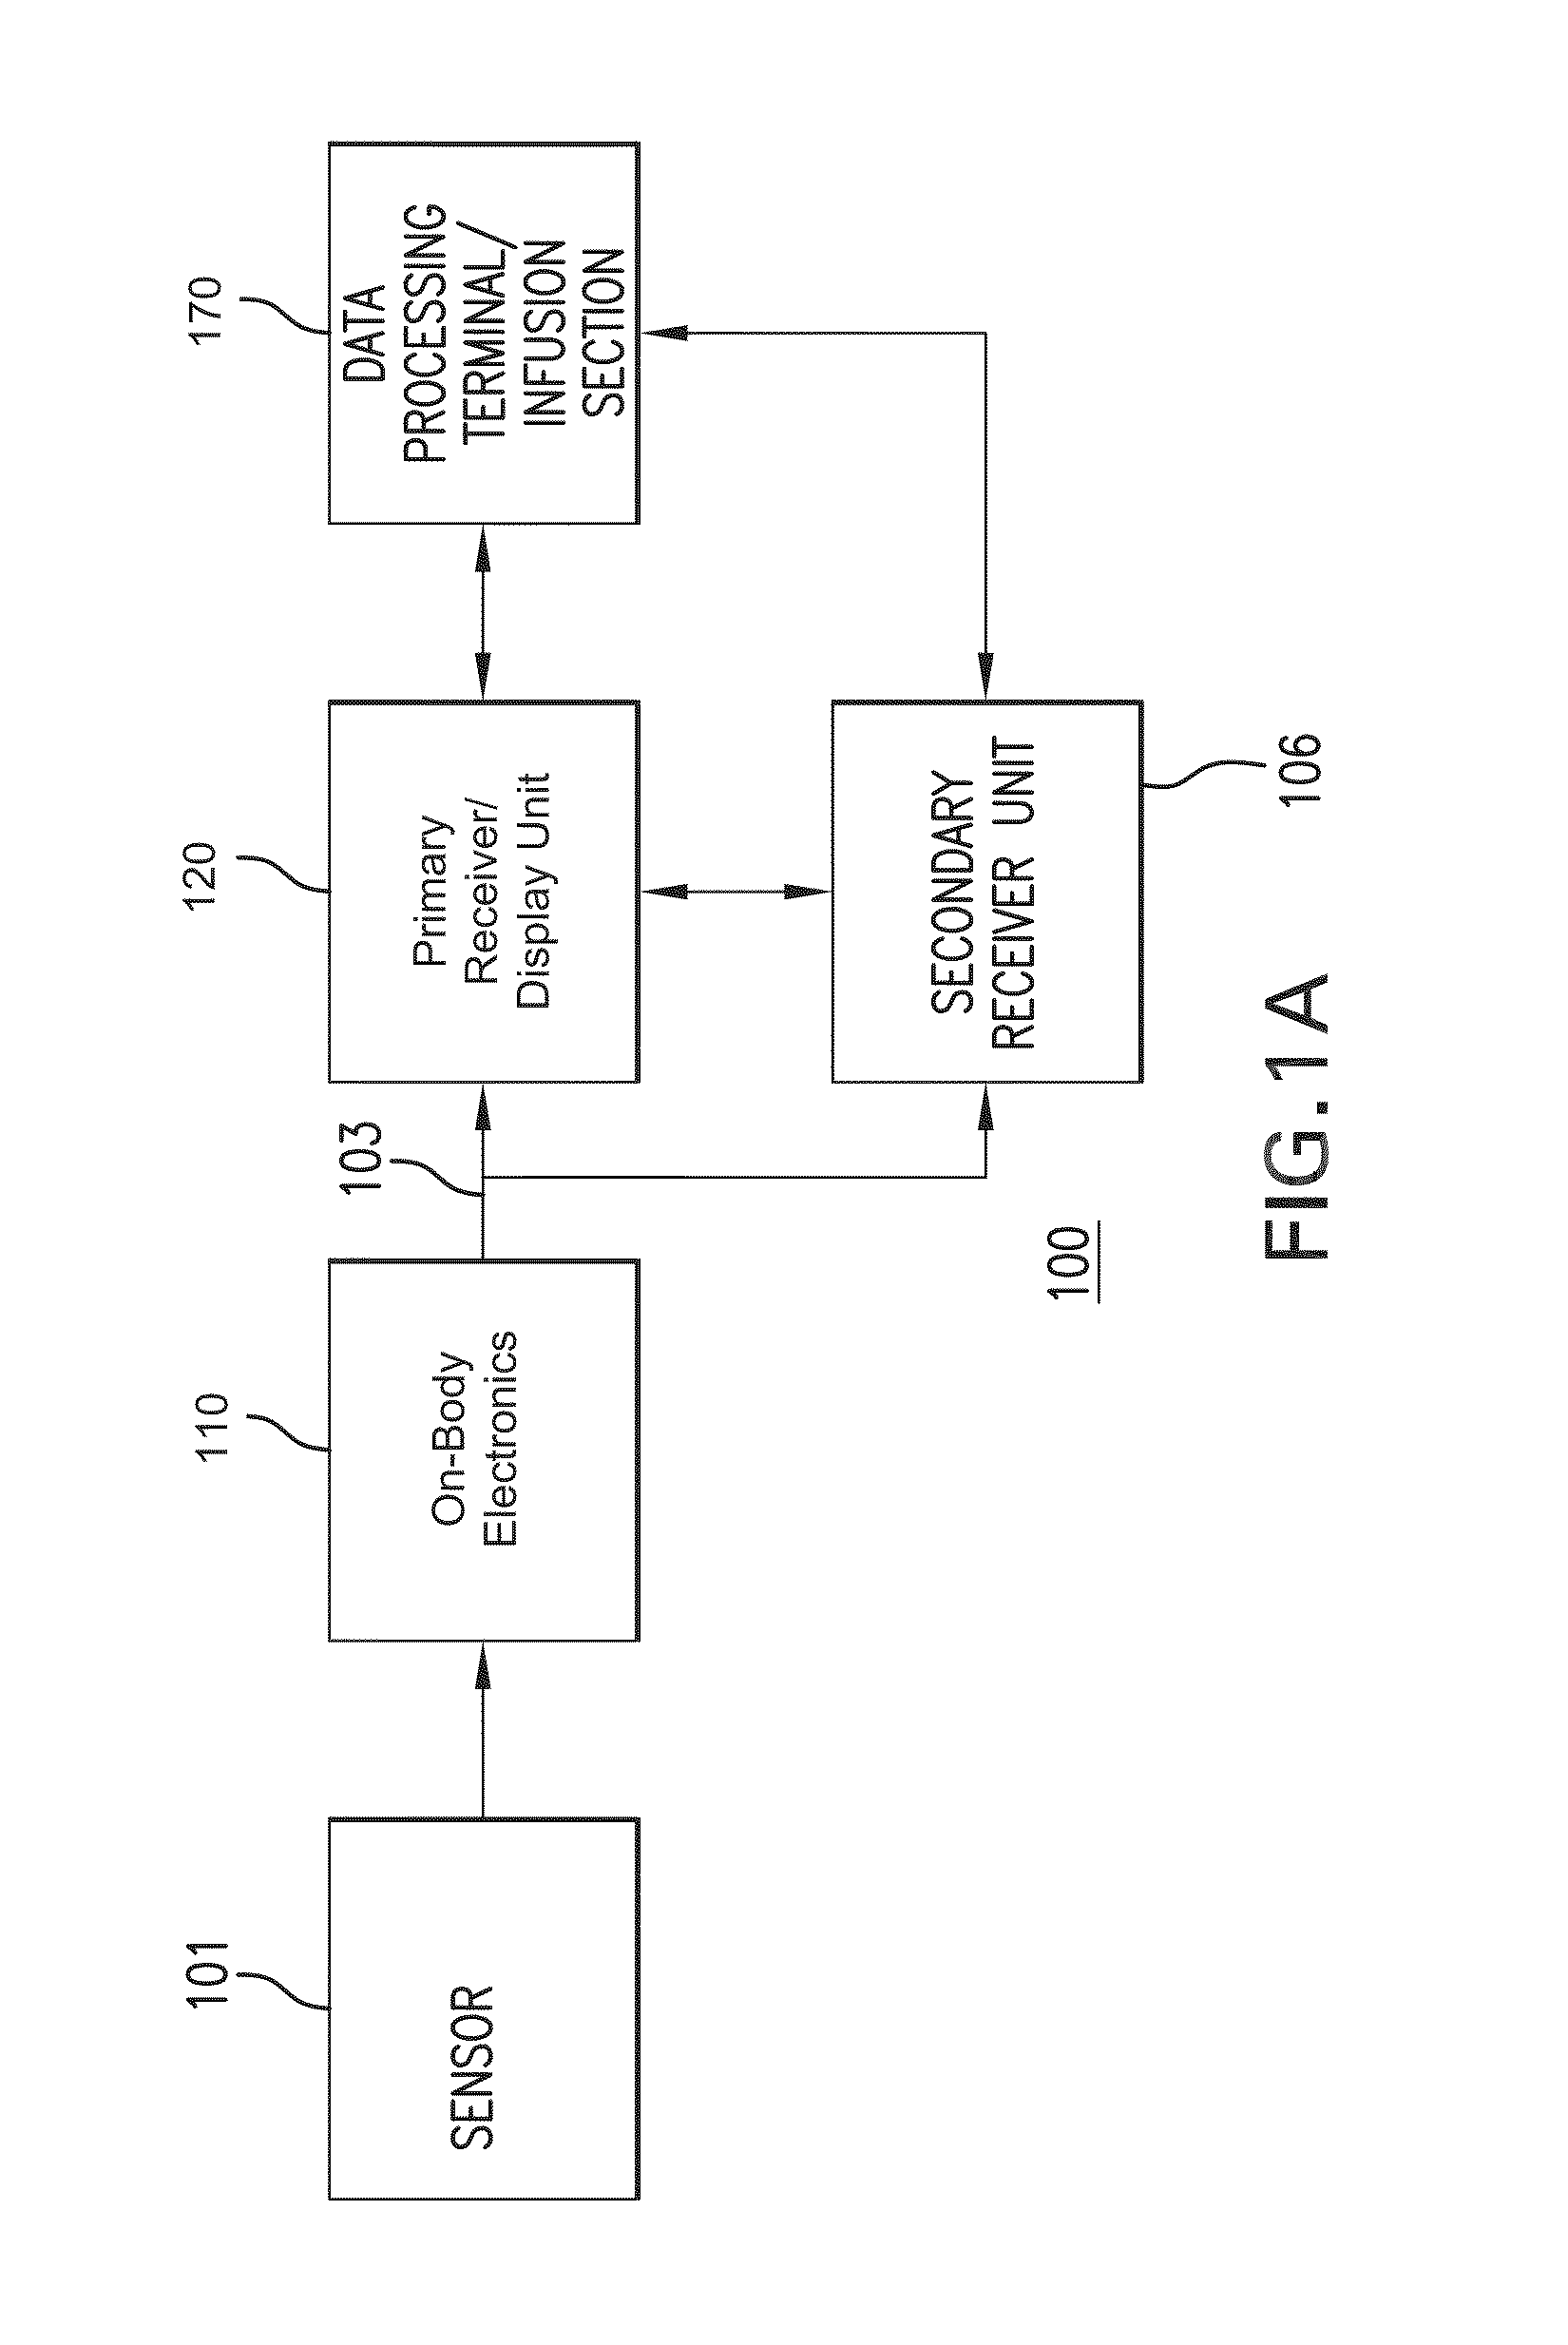 Interconnect for on-body analyte monitoring device